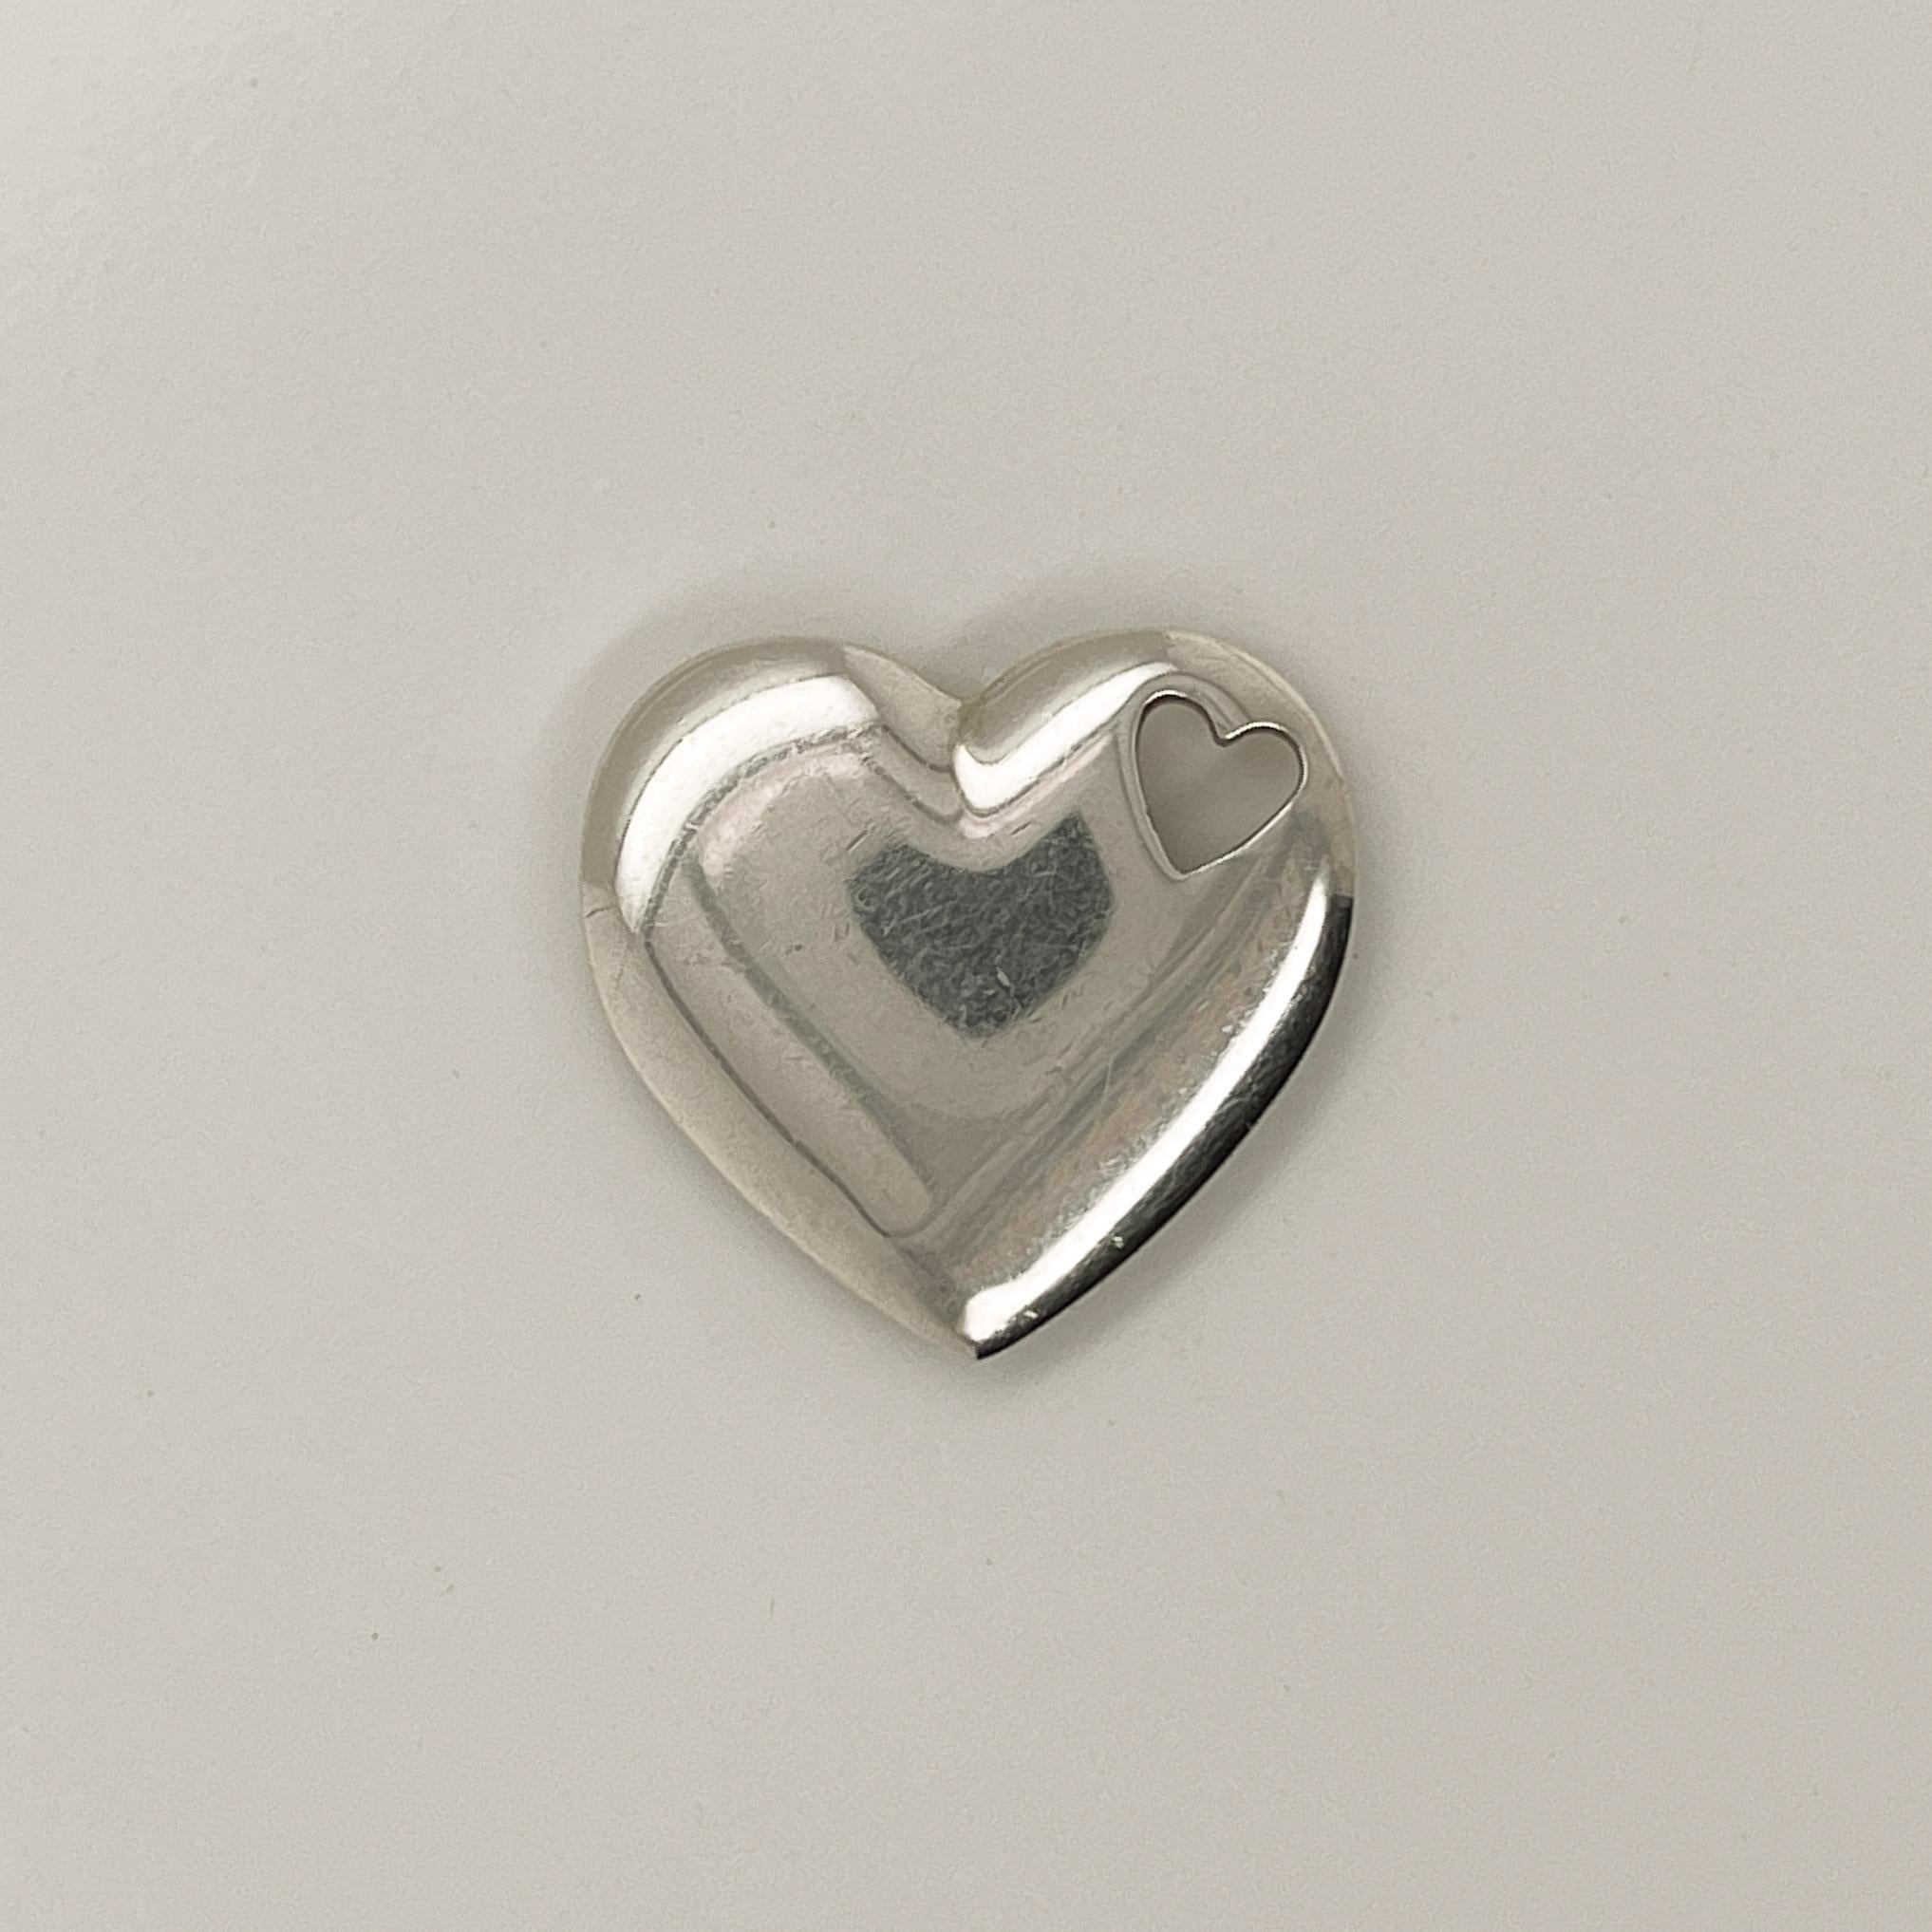 A fine Tiffany & Co heart pendant.

In sterling silver.

With a cut-out heart for the chain to one lobe.

Great Tiffany design!

Date:
20th Century

Overall Condition:
It is in overall good, as-pictured, used estate condition with some very fine &